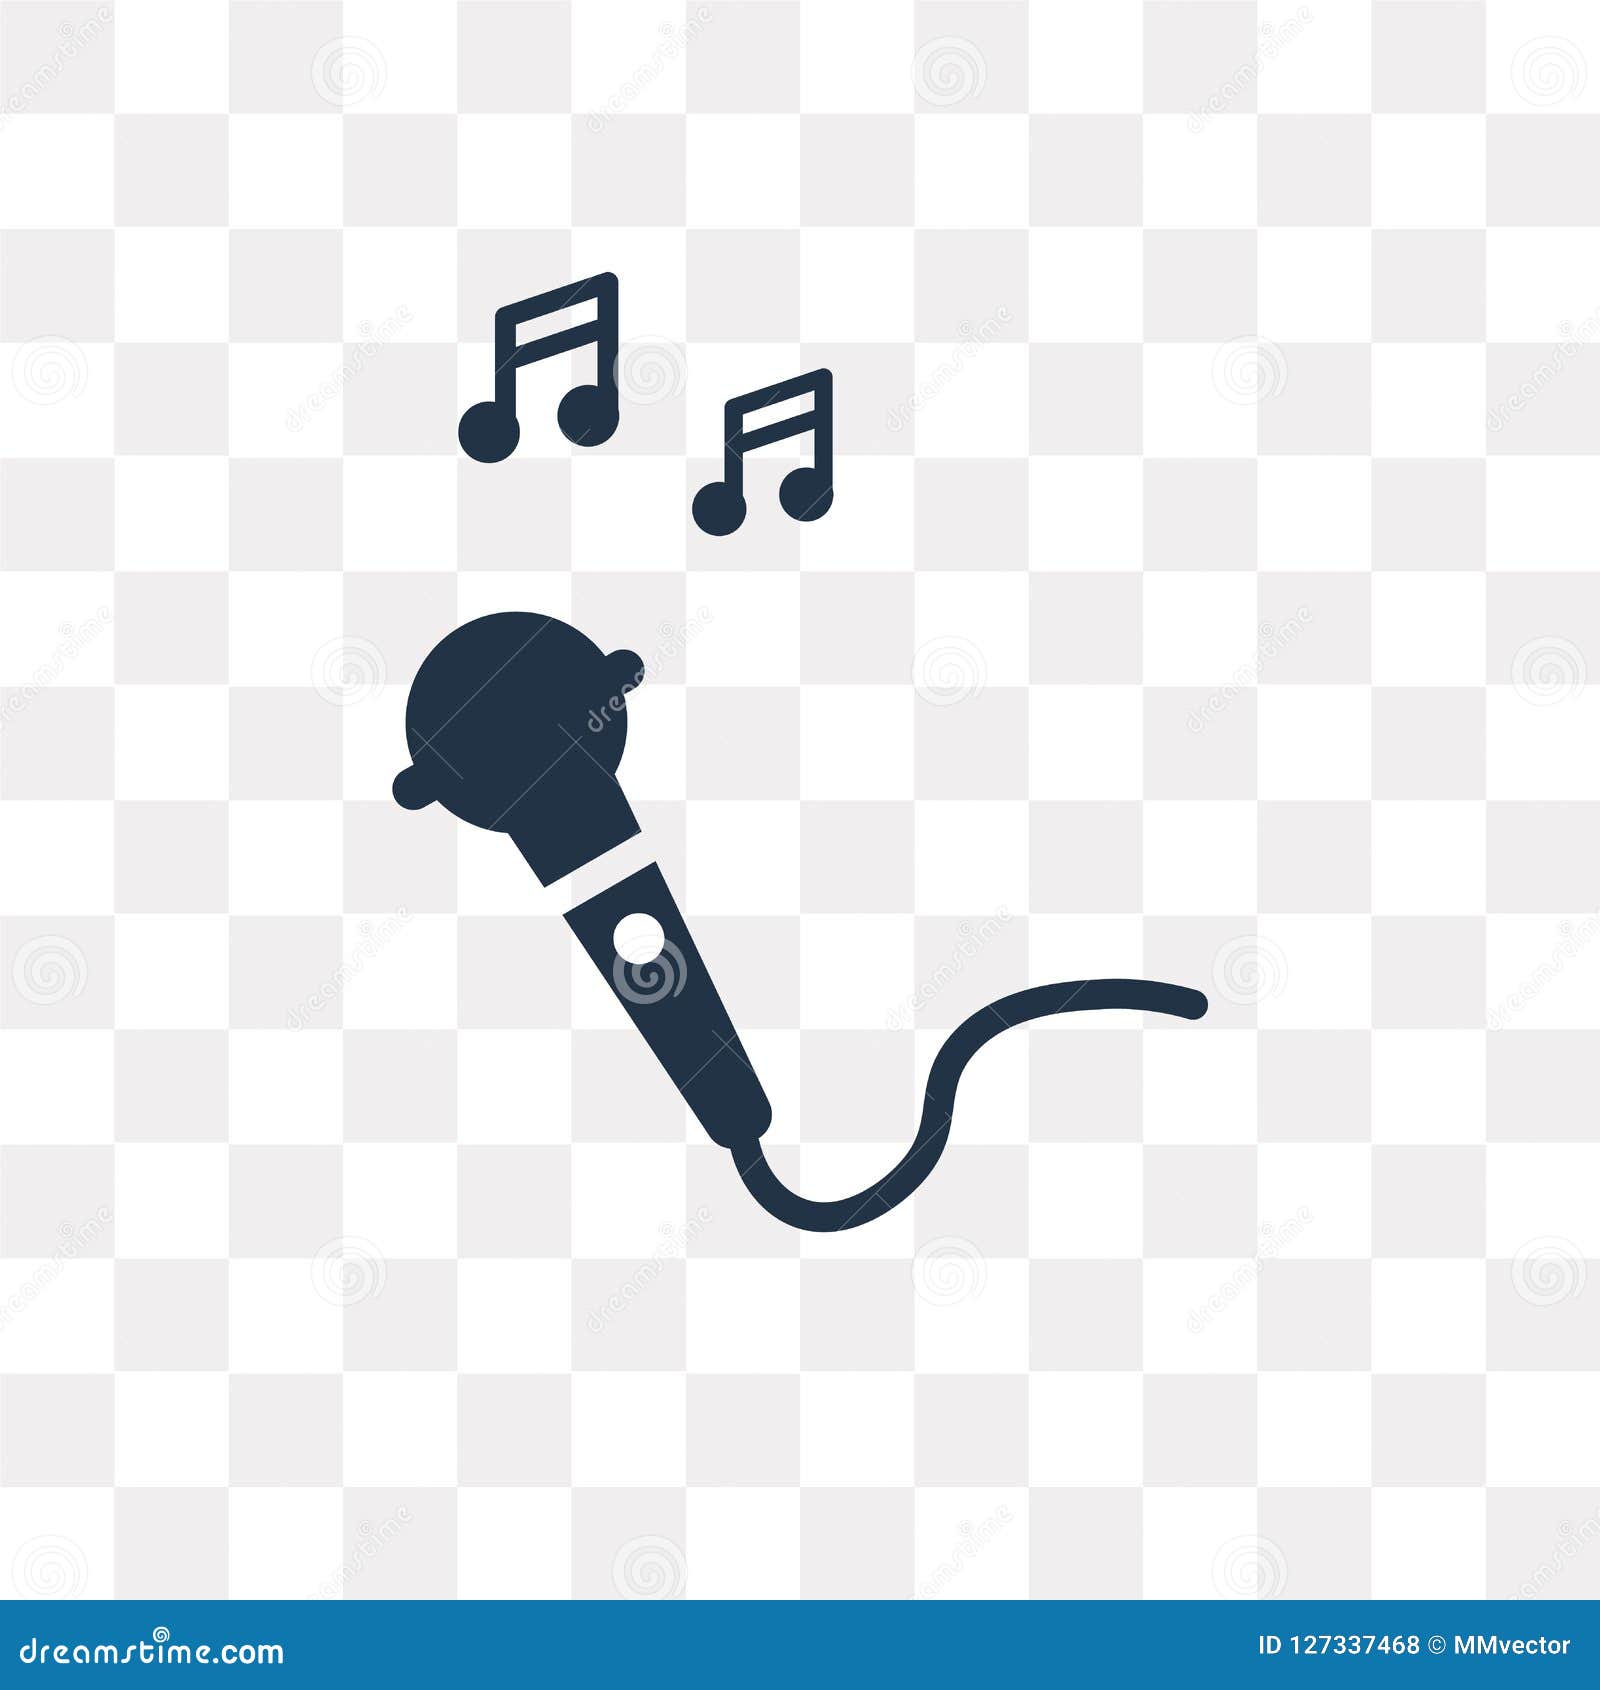 Karaoke Vector Art, Icons, and Graphics for Free Download